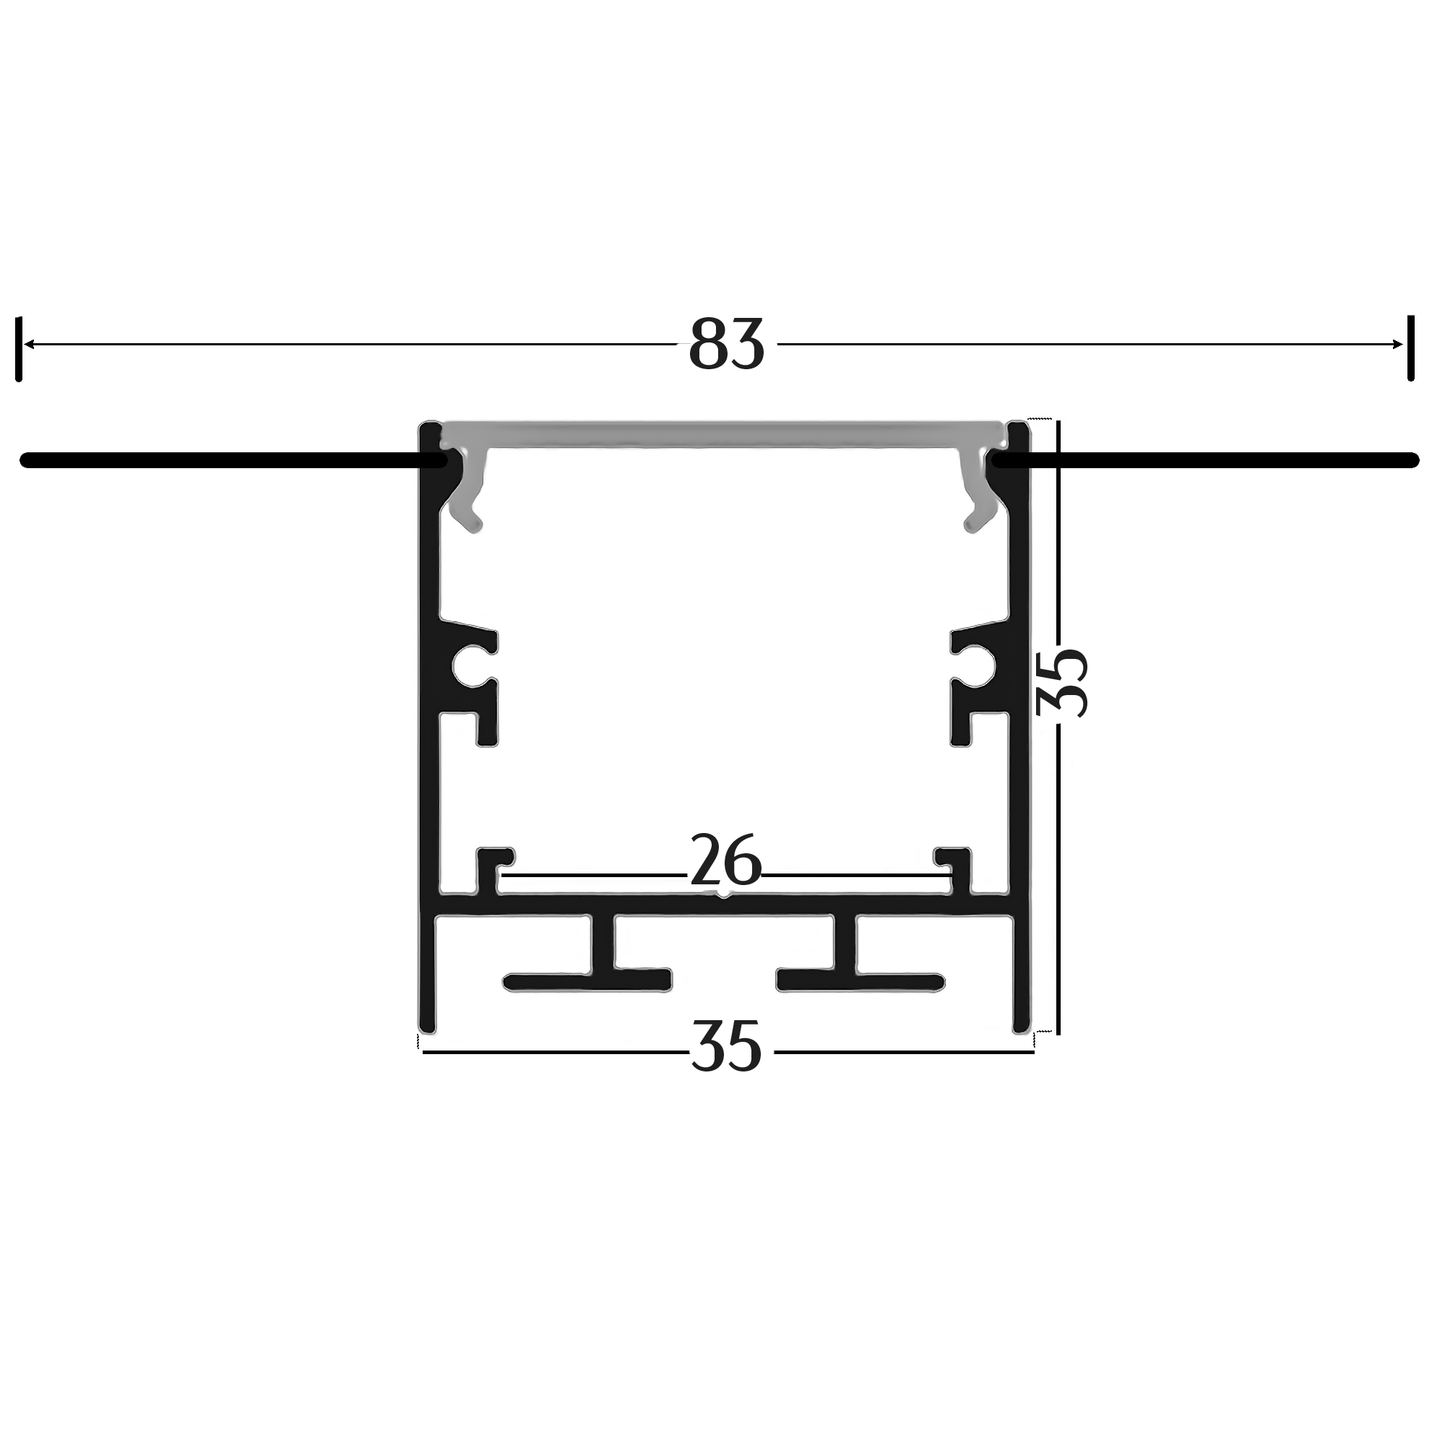 AL-BT-K8335C Embedded mounting Aluminium extrusion, profile, channel for strip light with opal diffuser, 83X35x2500mm